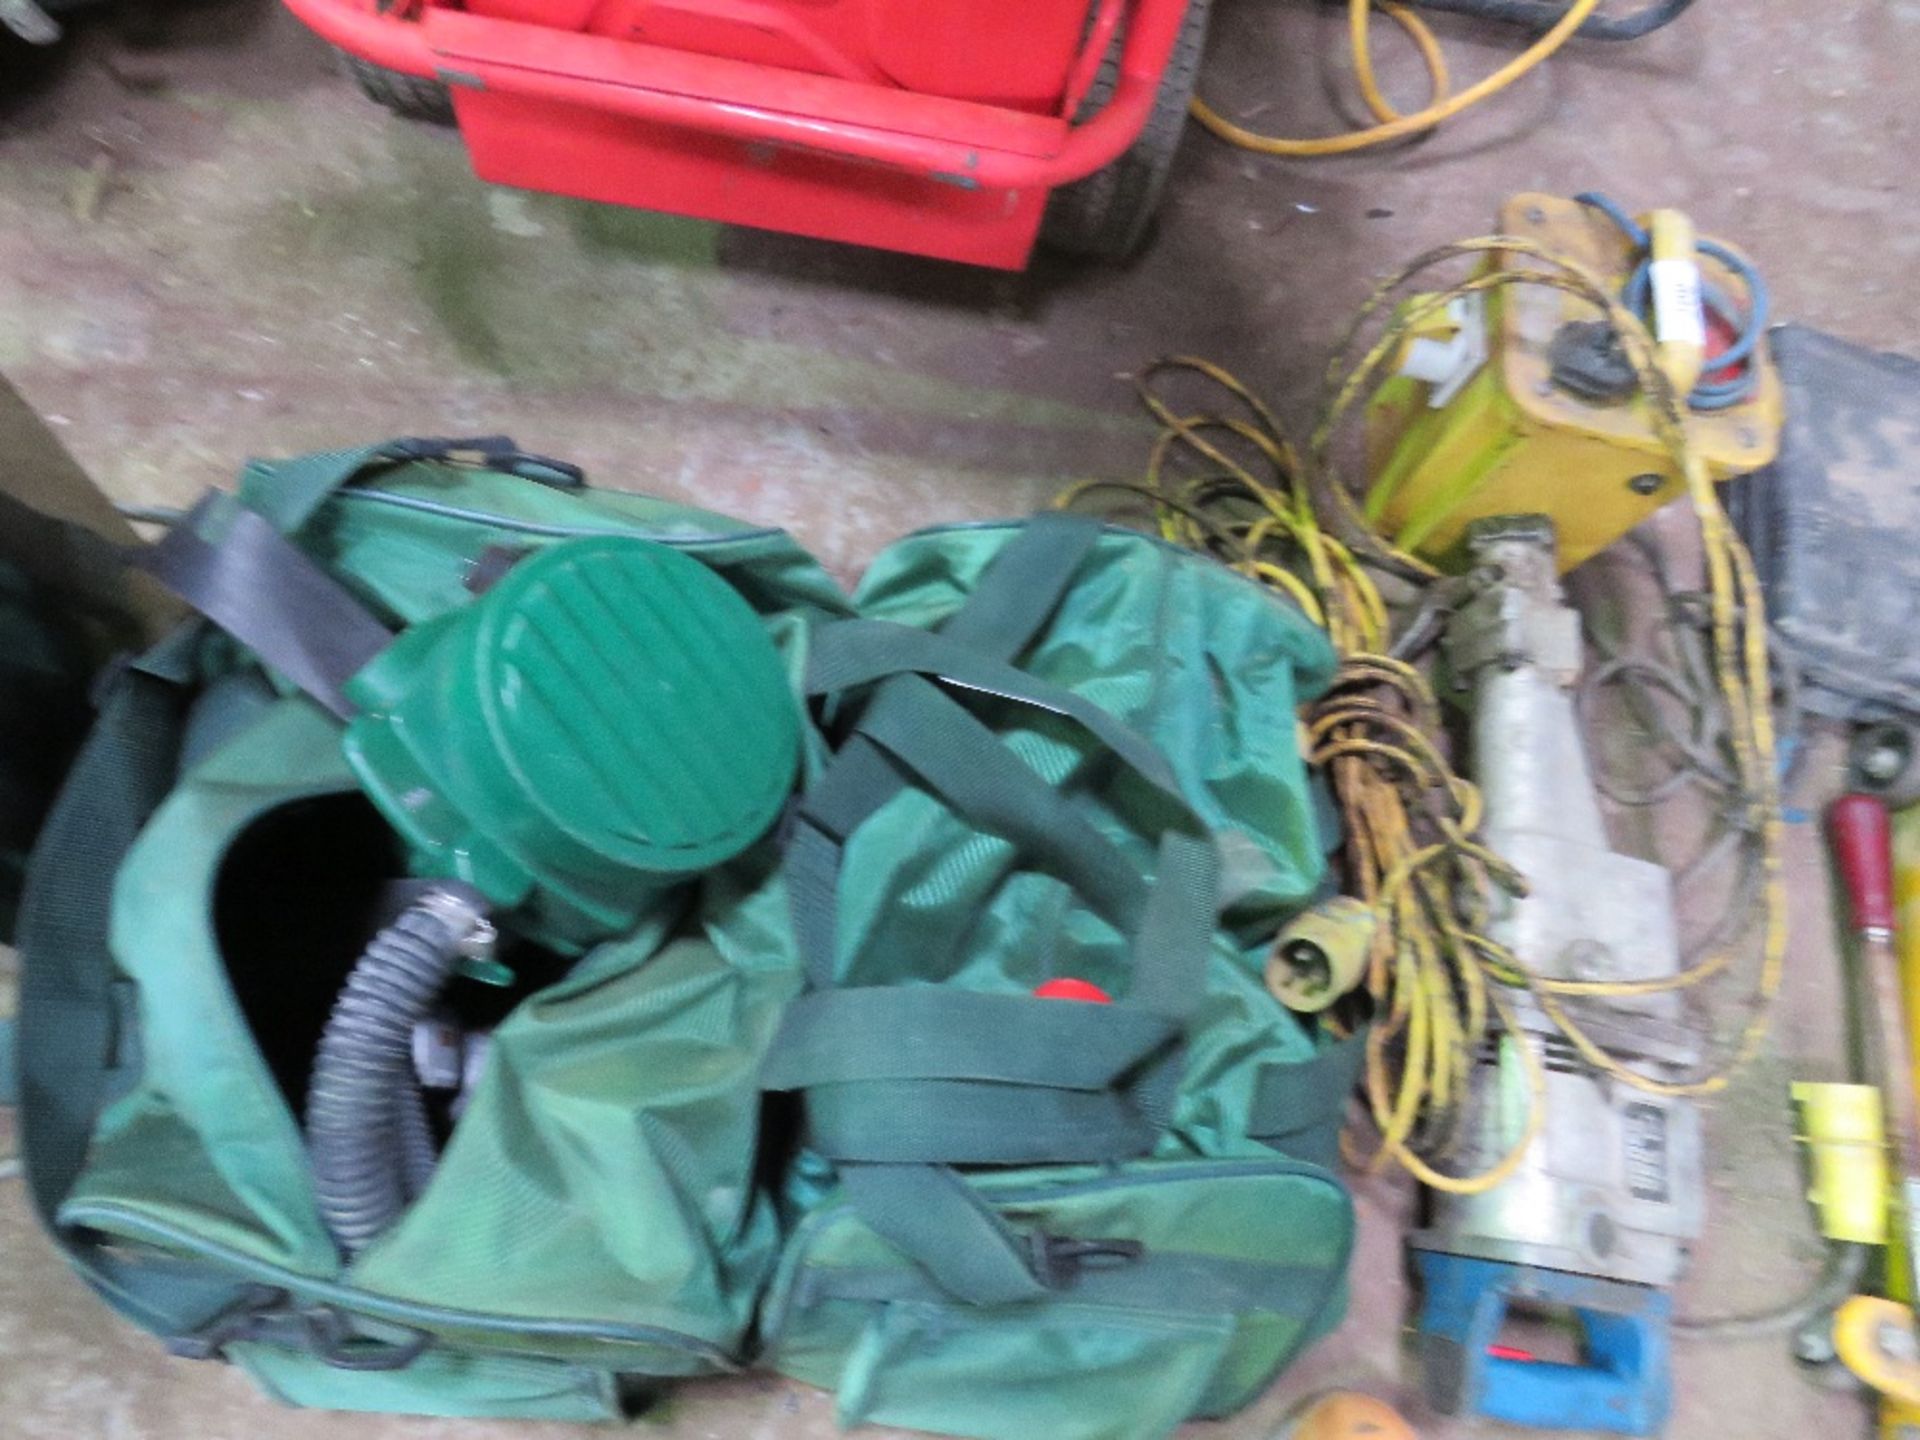 2 X BAGS OF ASBESTOS REMOVAL BREATHING EQUIPMENT